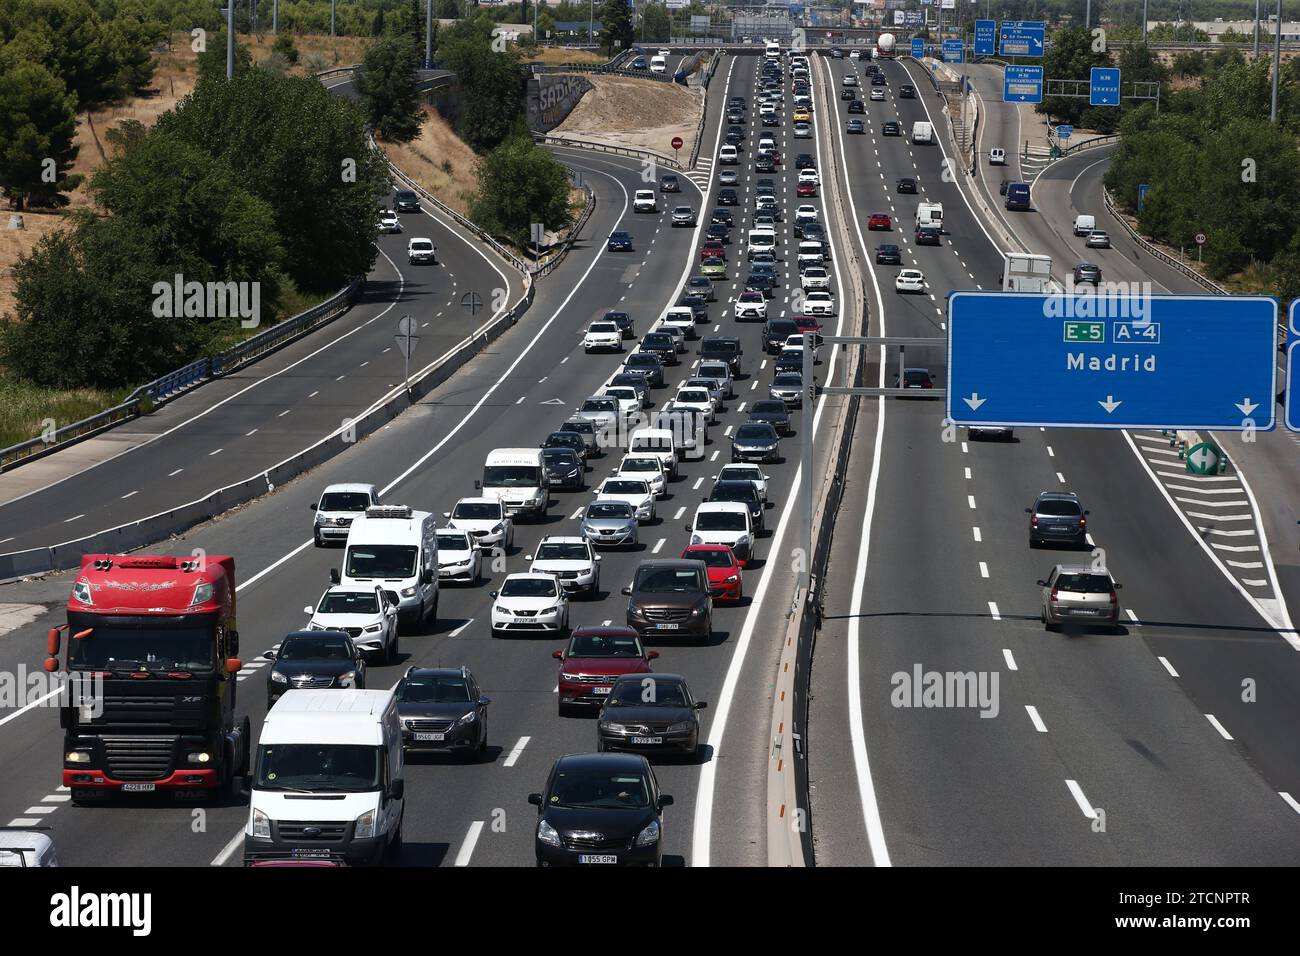 Madrid, 07/31/2020. Car and traffic jams due to the operation leaving on August 1st on the A 4 highway towards Andalusia at km 17. Photo: Jaime García. ARCHDC. Credit: Album / Archivo ABC / Jaime García Stock Photo